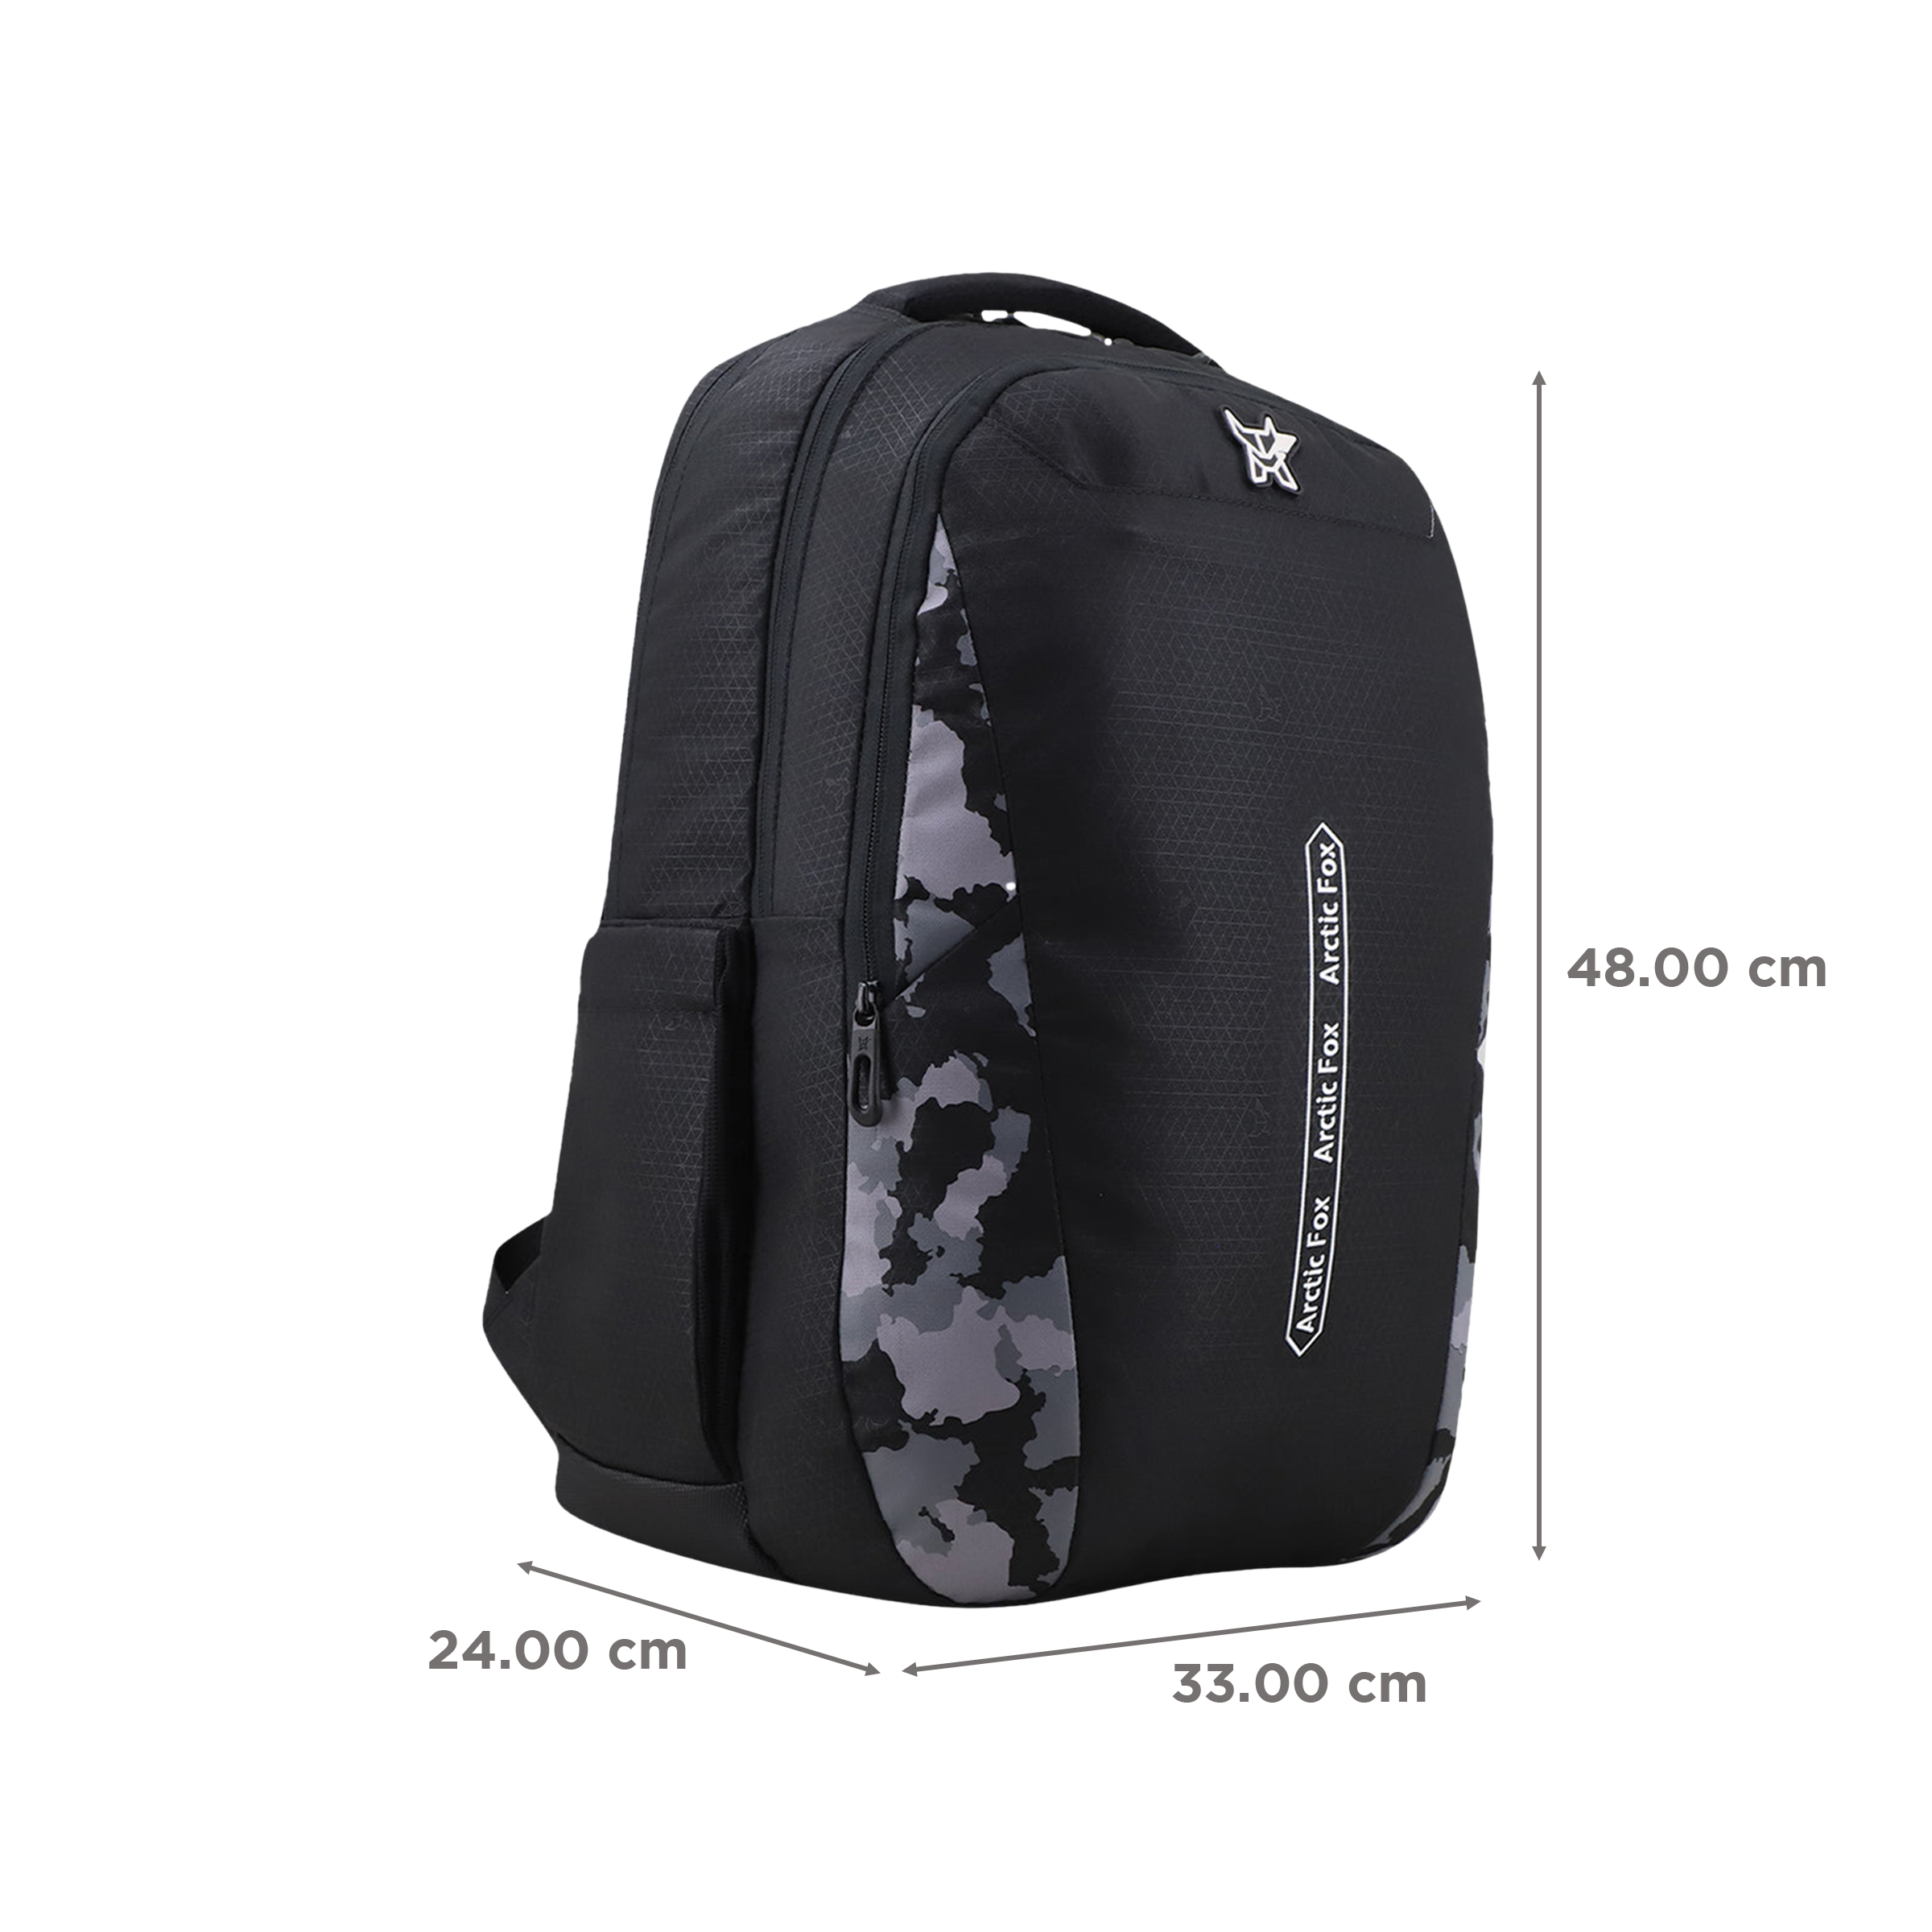 Ghost Claw  25 litres AntiTheft Laptop backpack 156 inch laptops   GODS